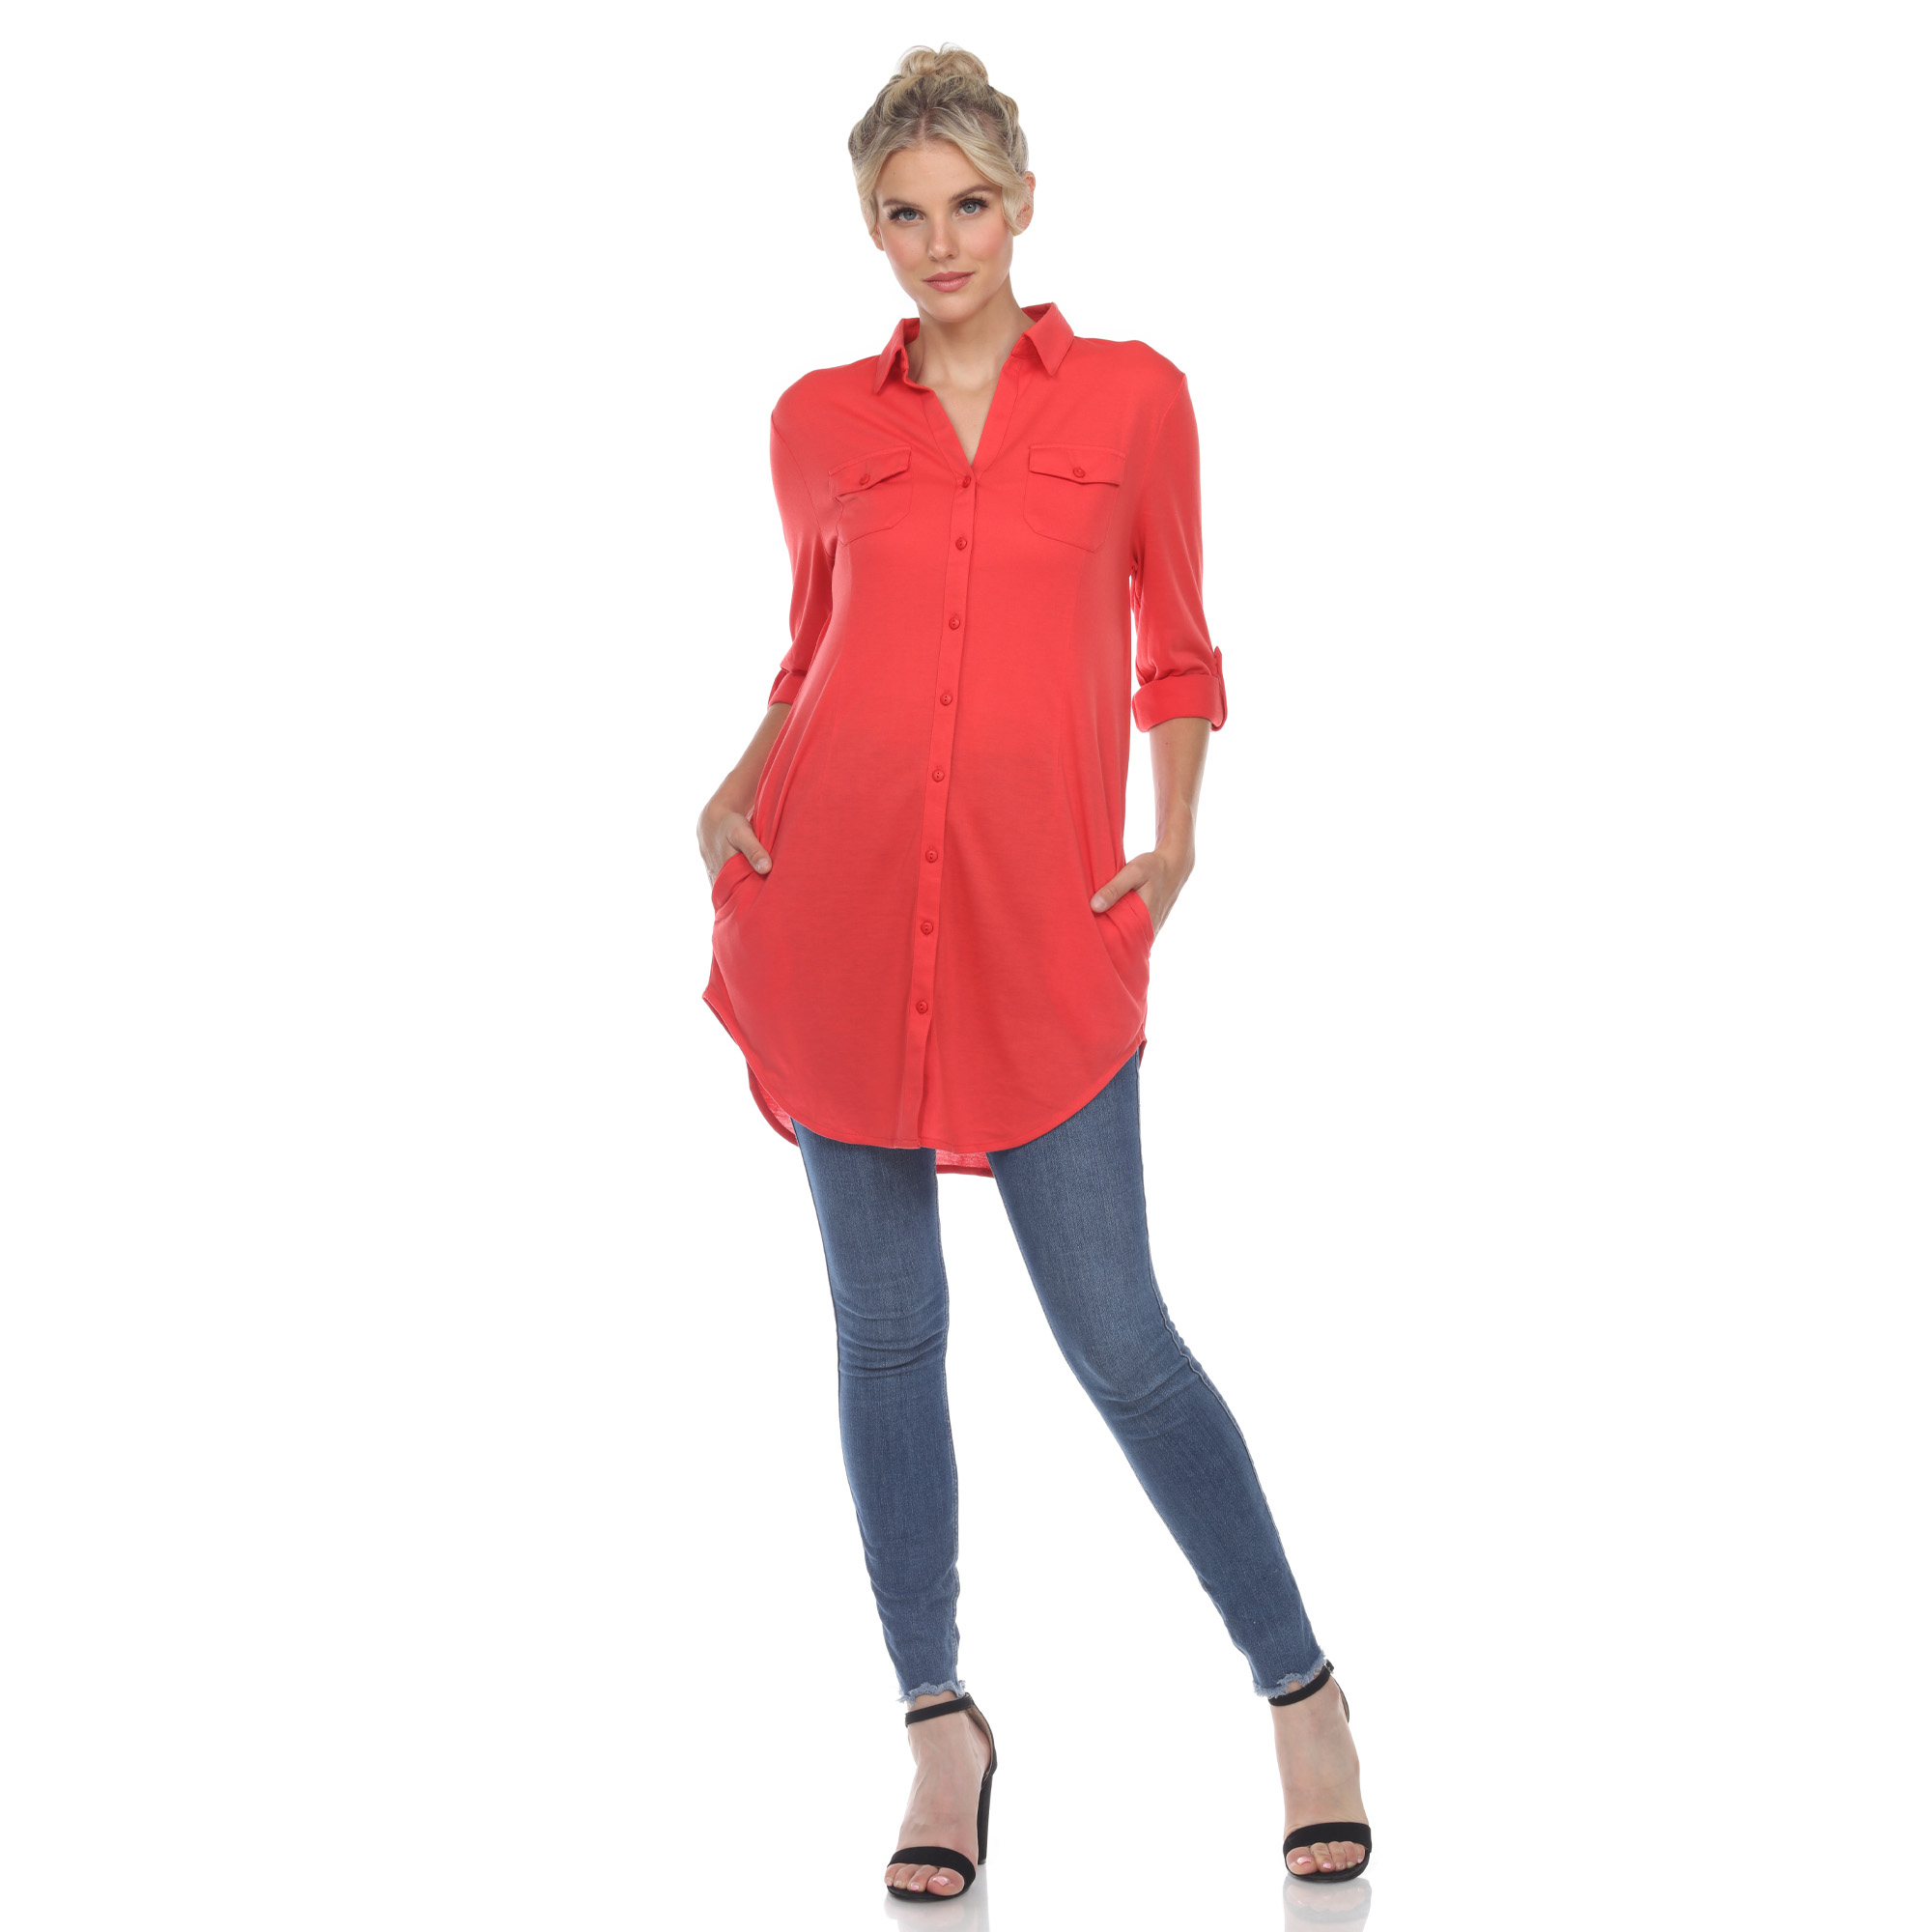 White Mark Women's Stretchy Quarter Sleeve Button Down Tunic Top With Pockets - Red, Small